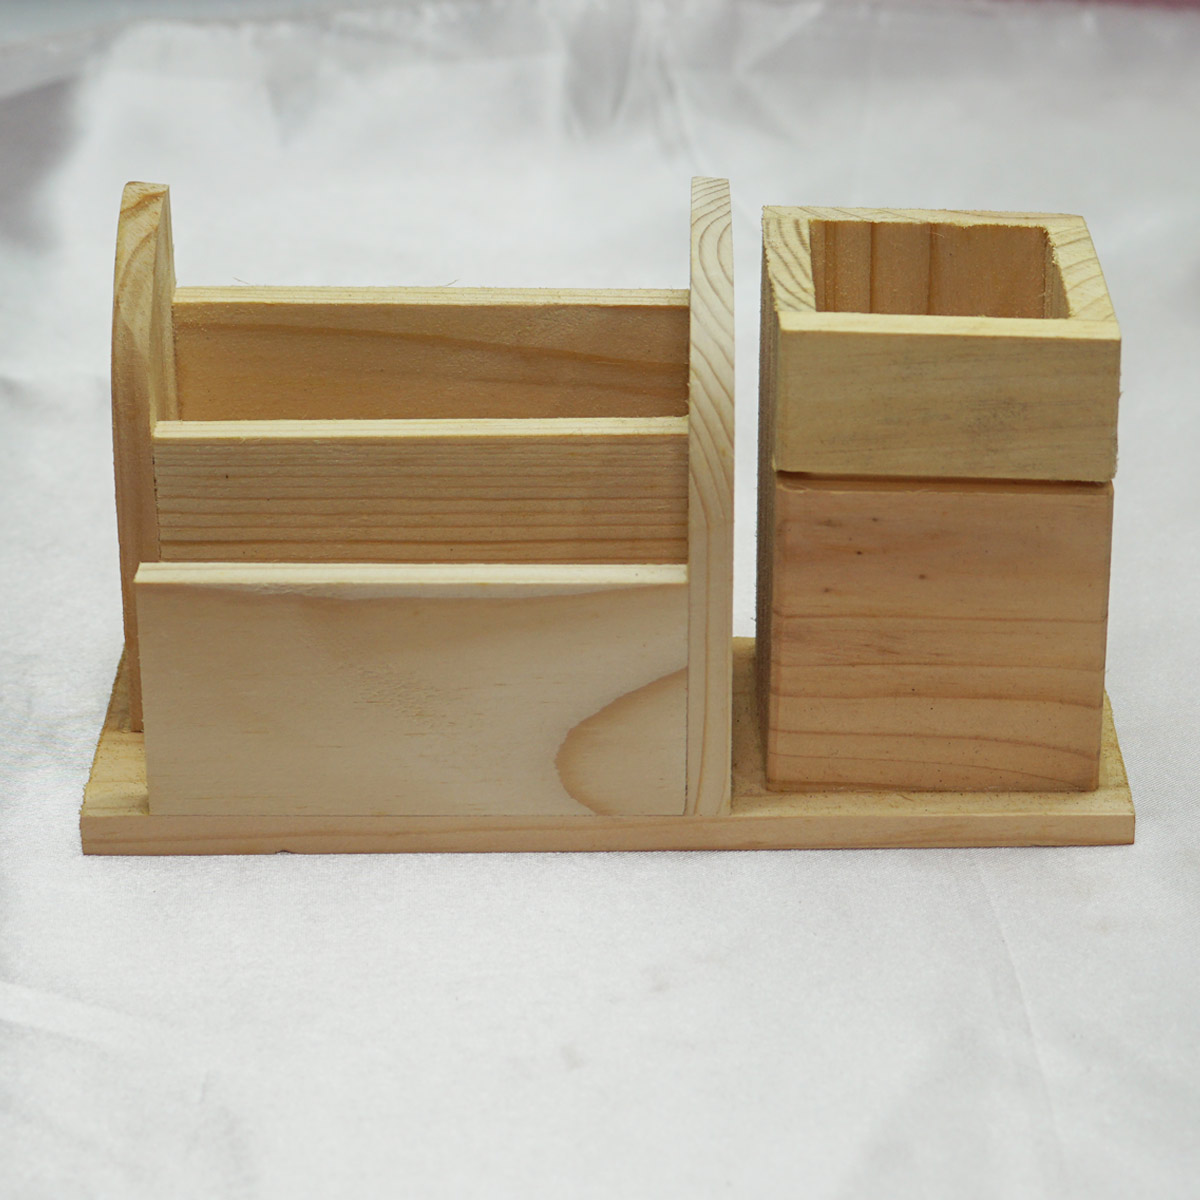 penhouse.in Customized Wooden Pen Stand & Holder SKU 87162